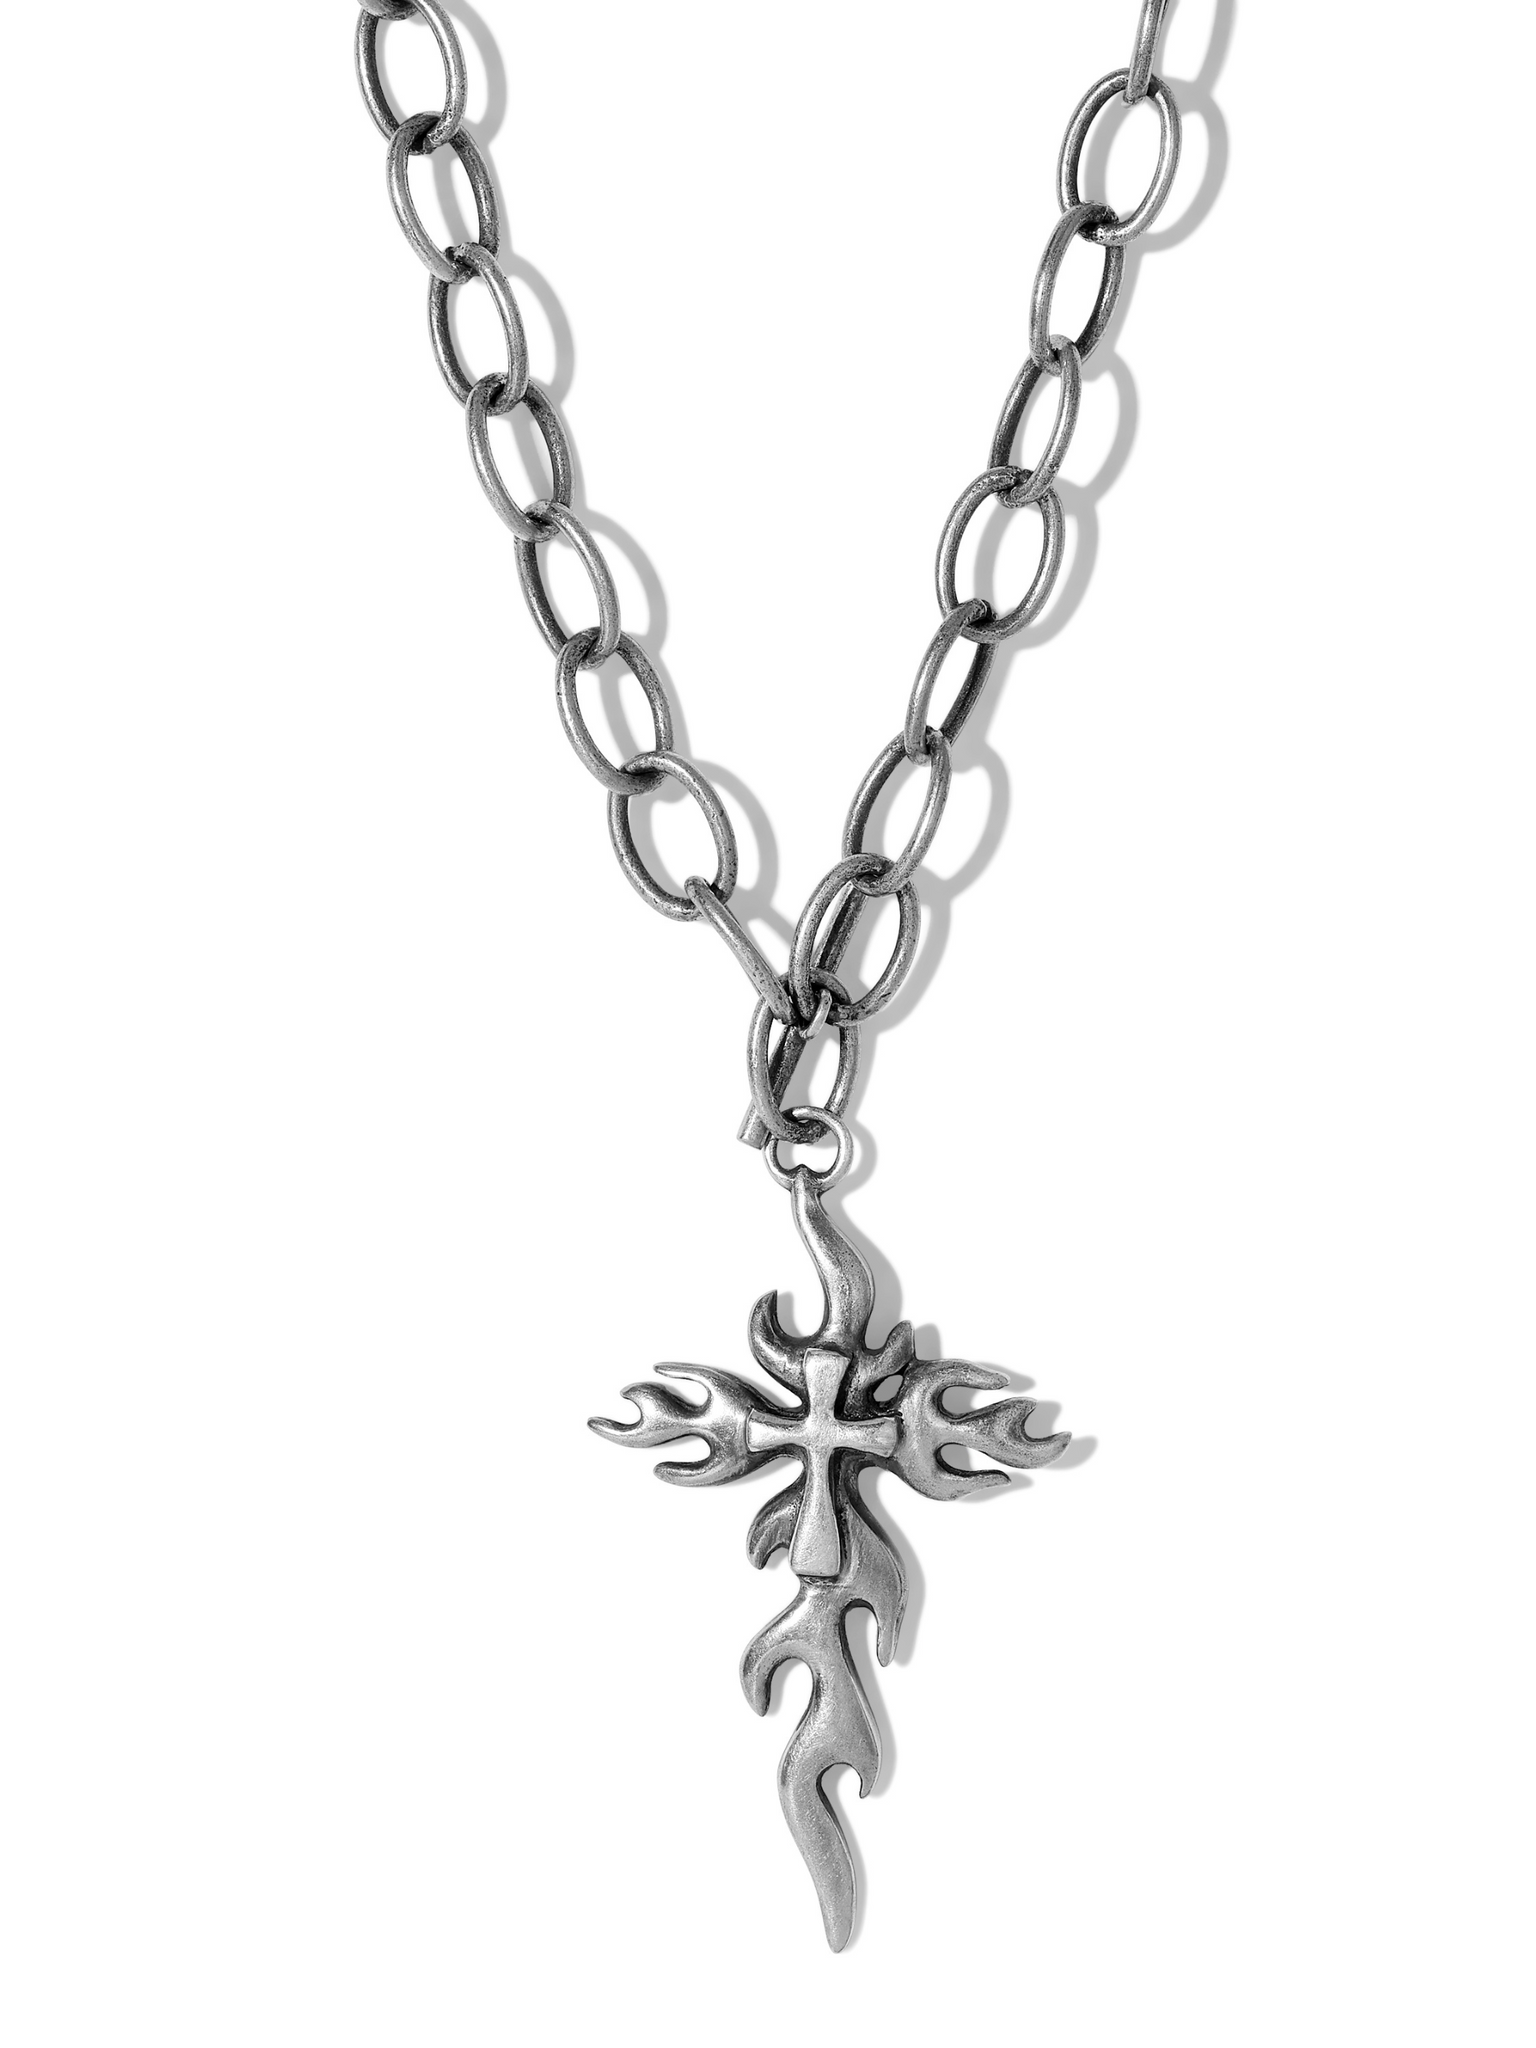 The Mena Flaming Cross Necklace - Silver